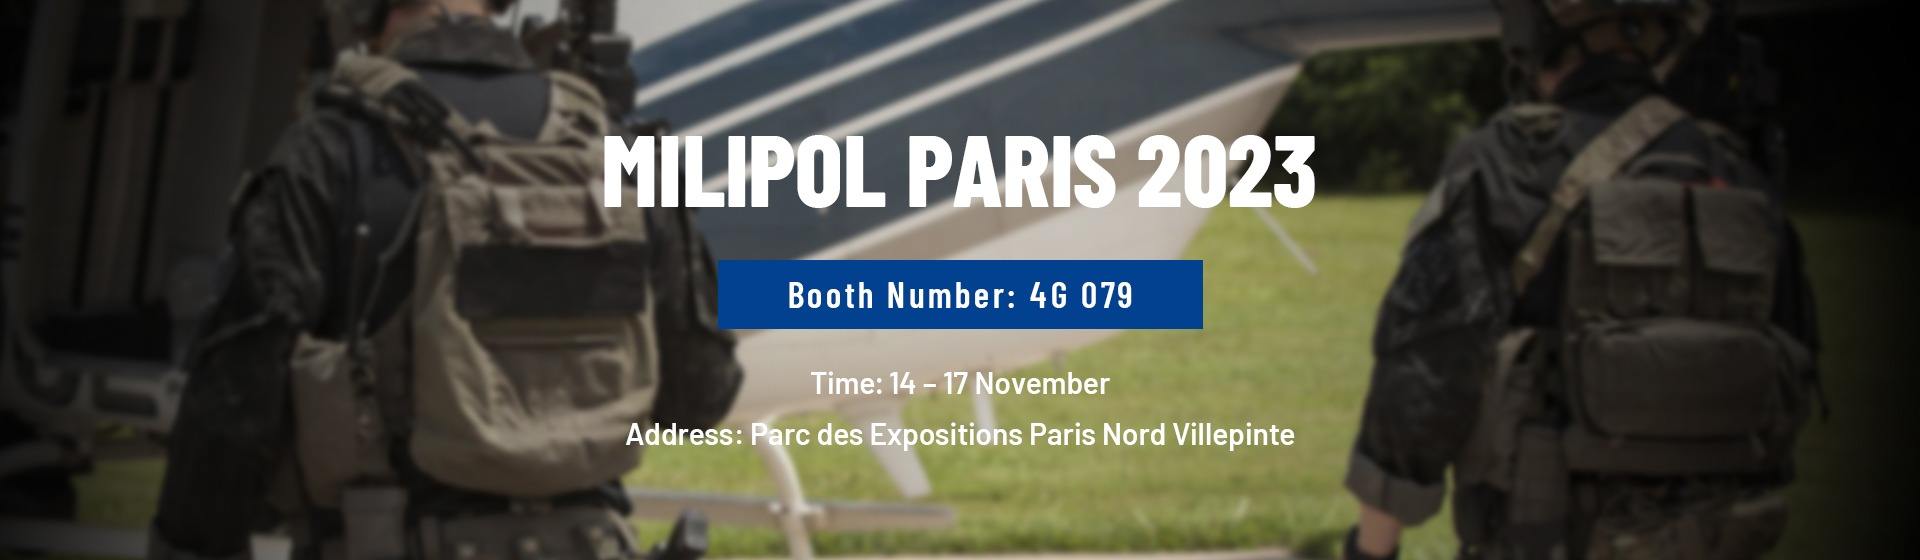 Discover Zennison's Cutting-Edge Bulletproof and Tactical Gear at Milipol Paris 2023!